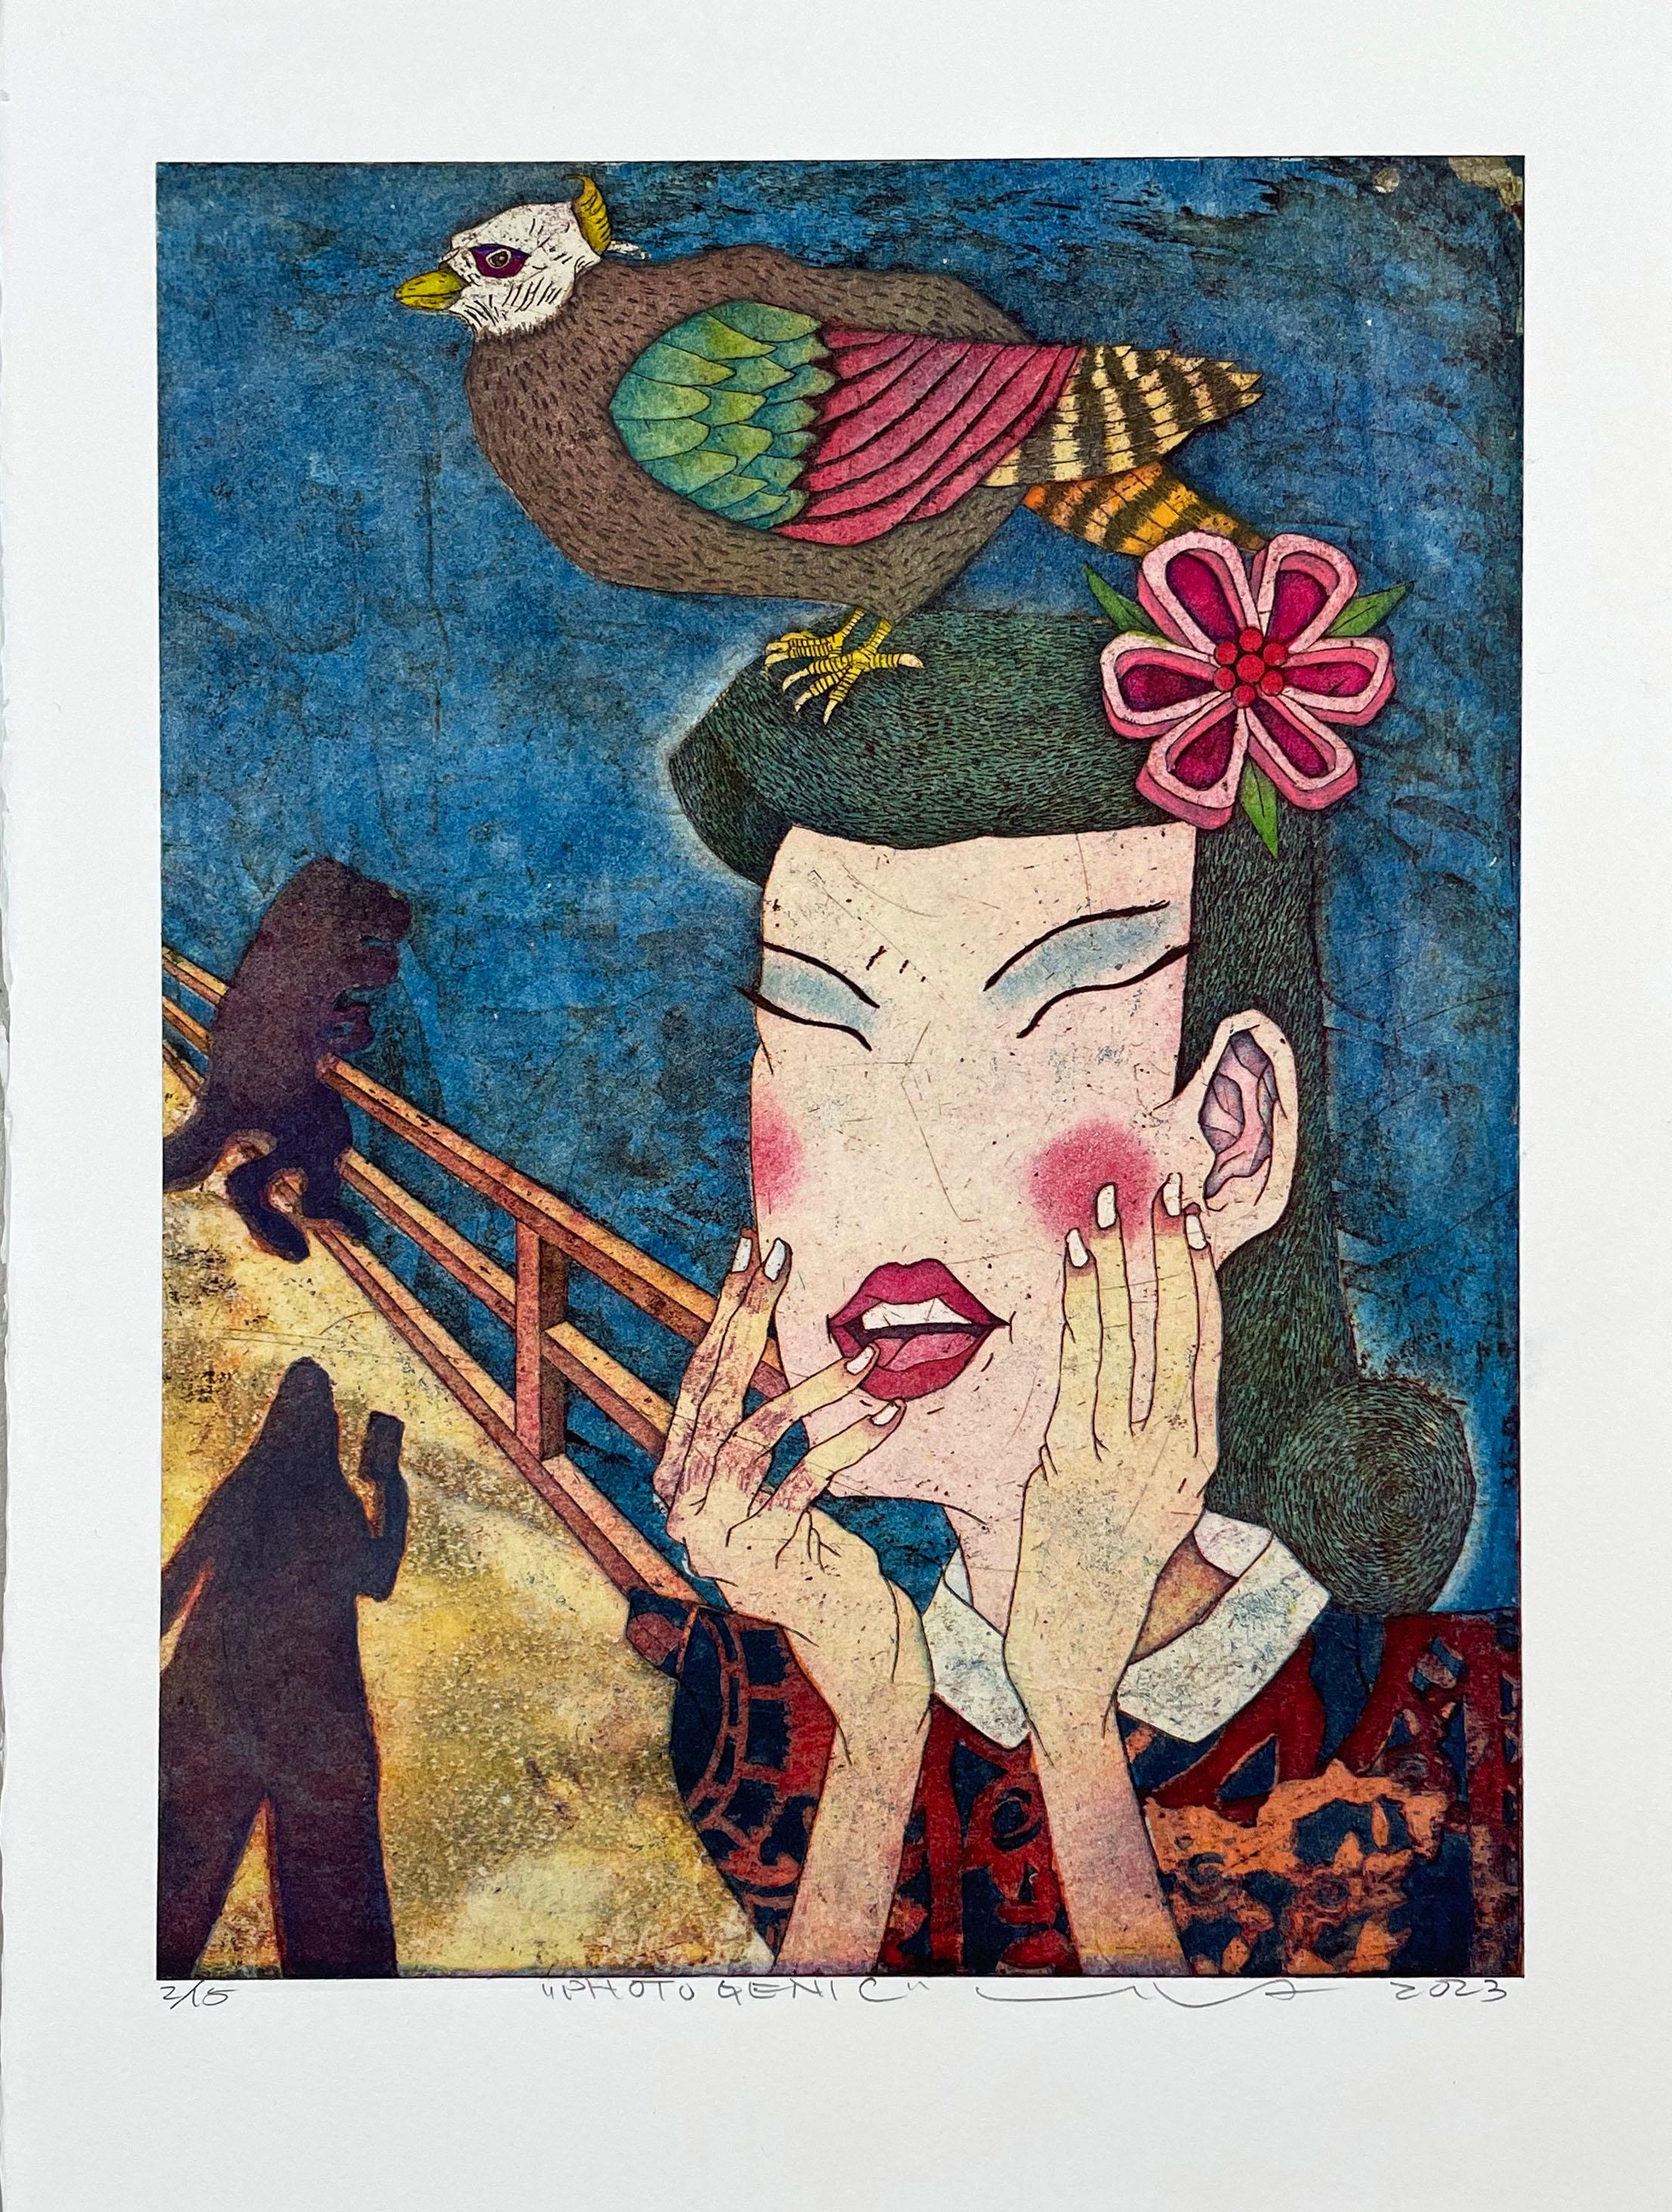 Signed, titled, and numbered from the edition of 15. Image of a young girl with a bird perched on her head while someone takes her photo. While the images have some resemblance to traditional Japanese Ukiyo-e prints, their sense of whimsy, satire